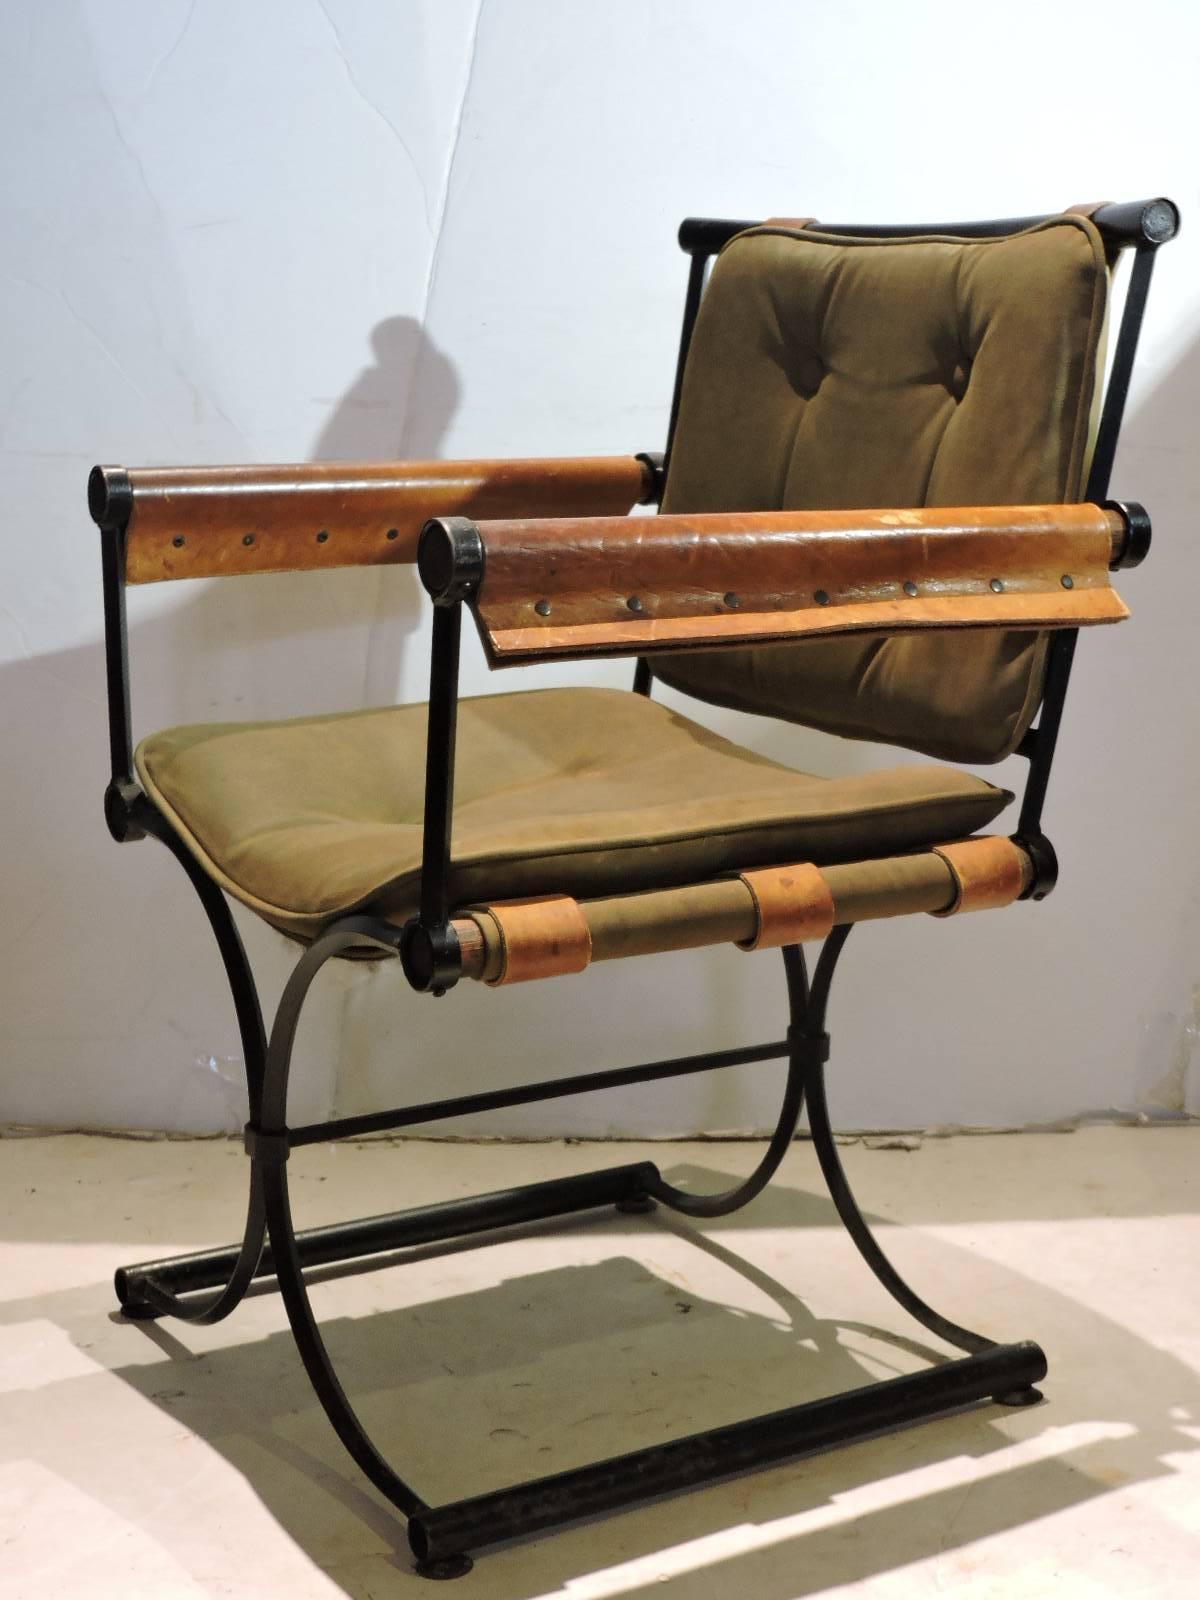 California modernist campaign chair designed by Cleo Baldon for Inca Products - Santa Fe Springs, Ca. All original vintage iron and leather riveted with olive green suede upholstery with beautifully aged patina color - circa 1960s.